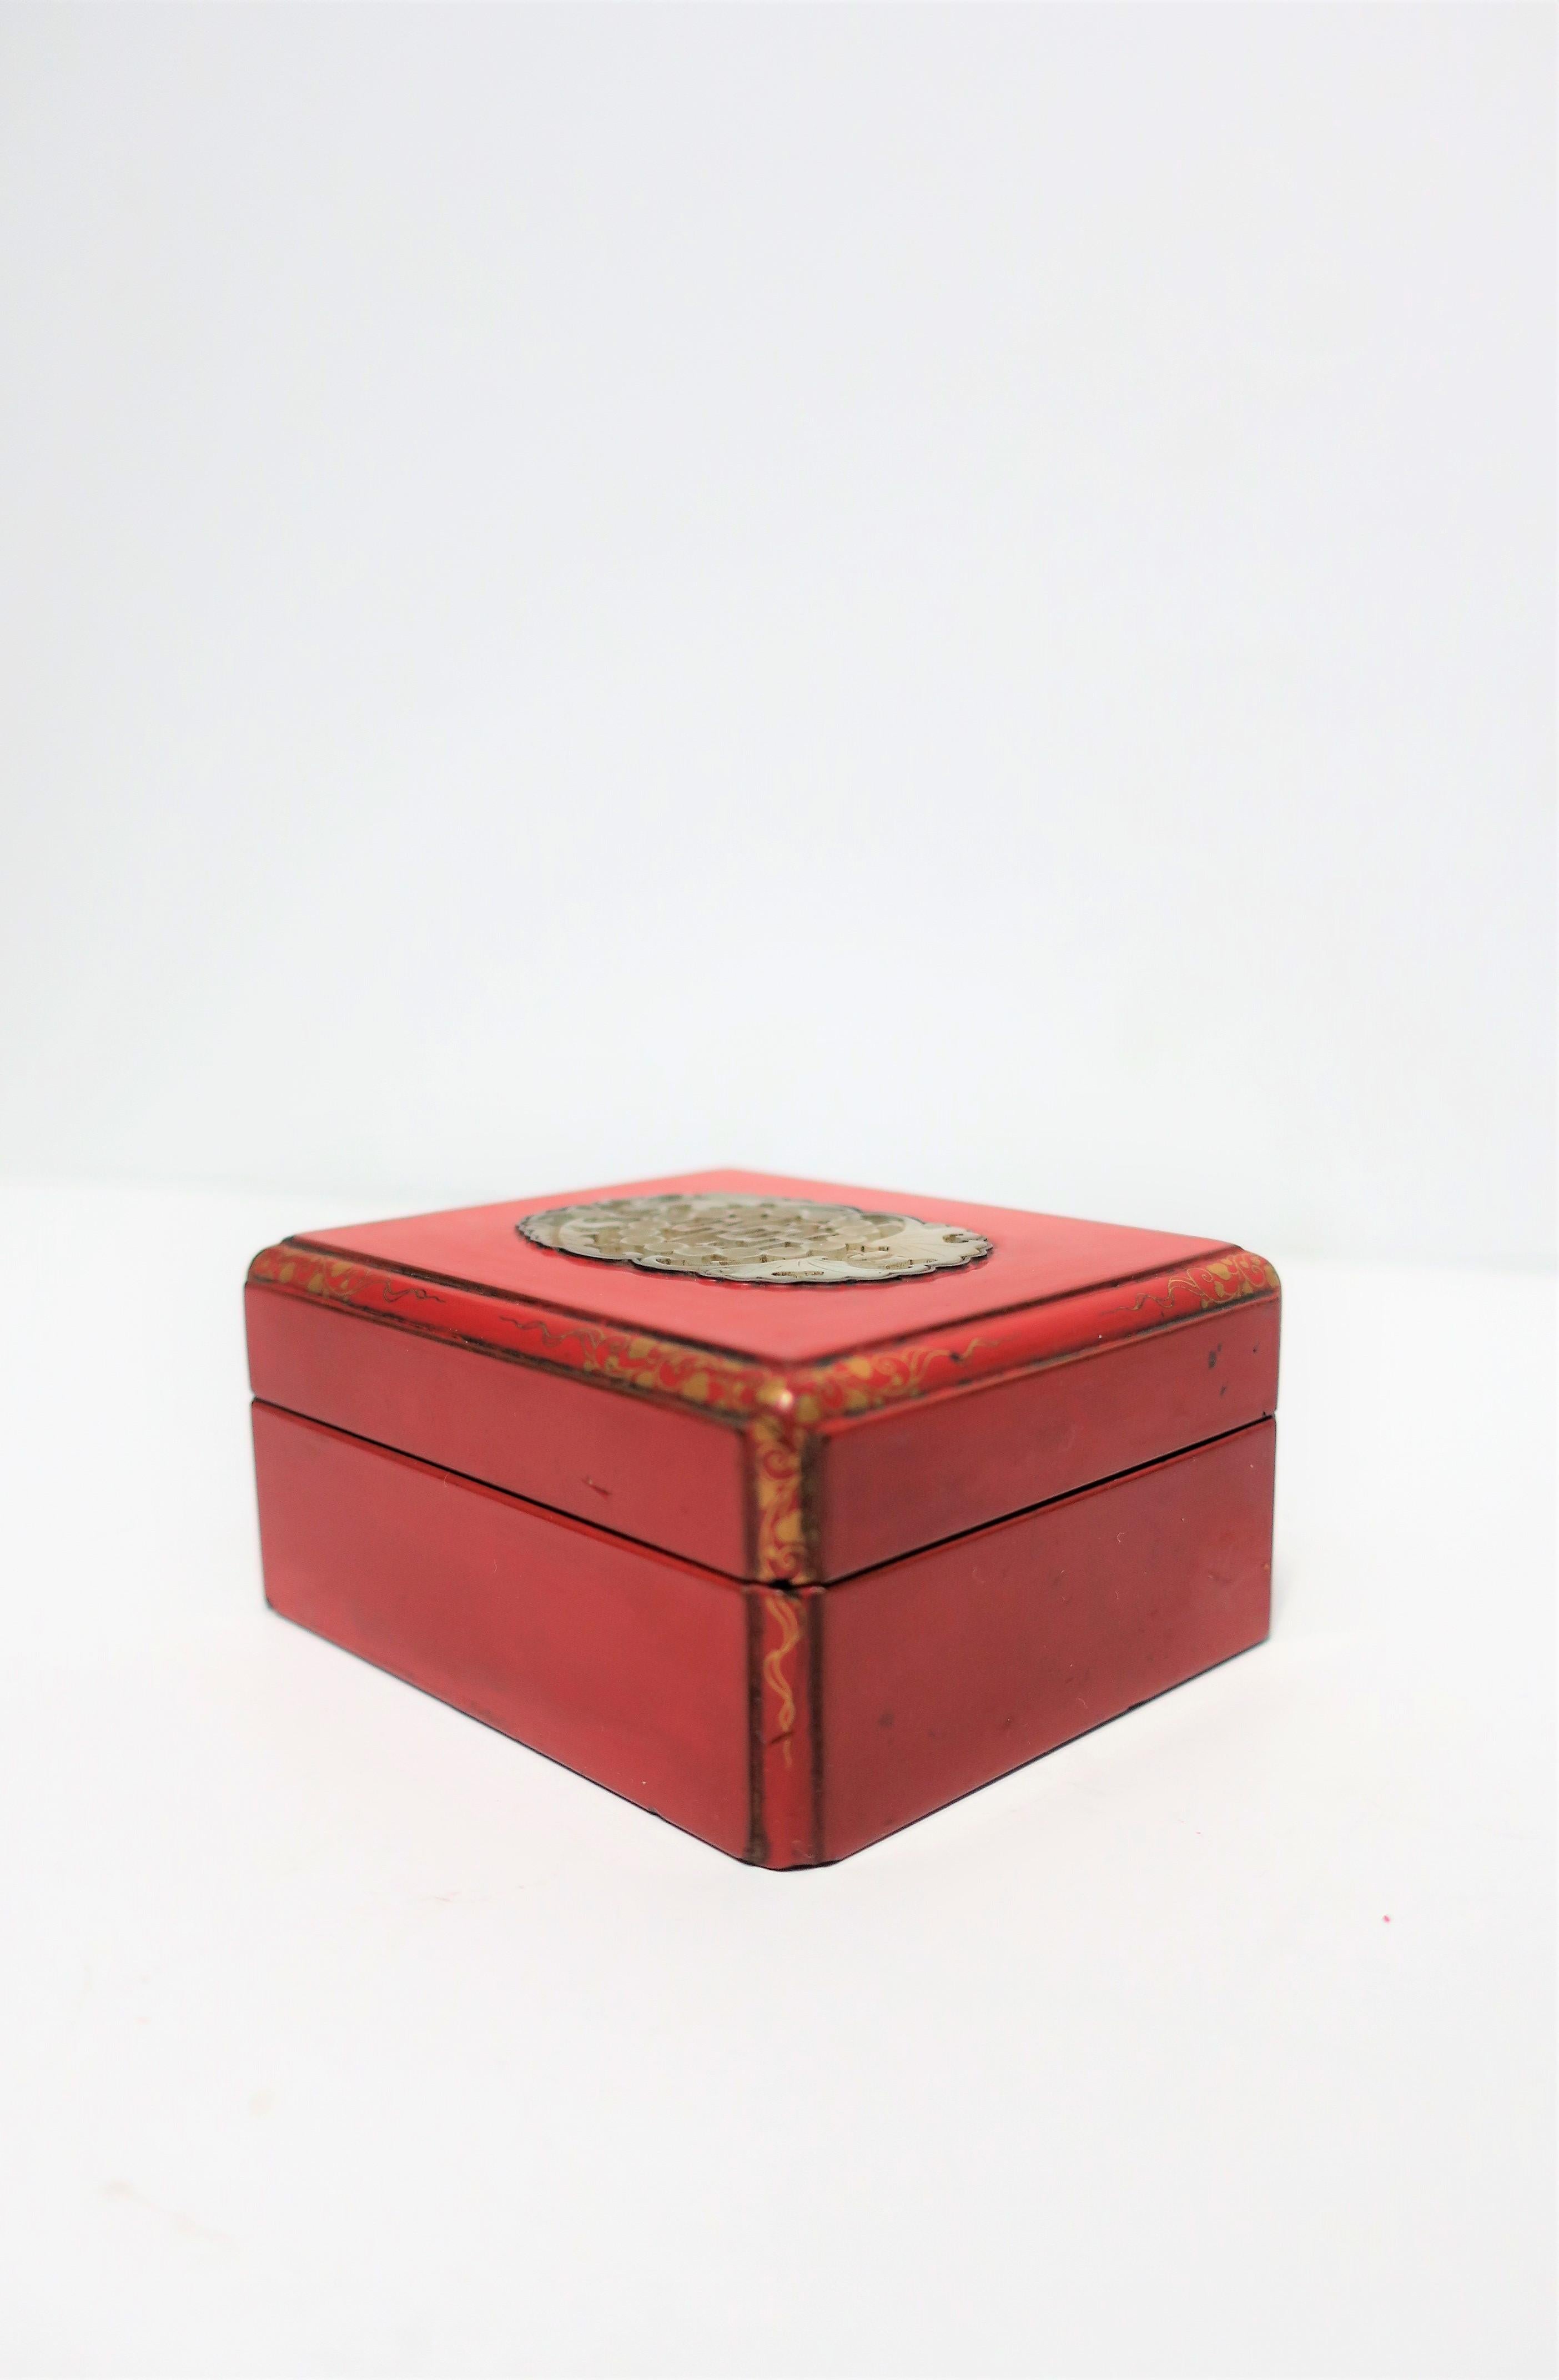 An Asian red burgundy lacquered box with Chinese white jade top and gold detail corners, Art Deco period, Japan. A beautiful square decorative box for jewelry or other small items, in a red burgundy/Ox blood lacquered wood and an inset Chinese 19th